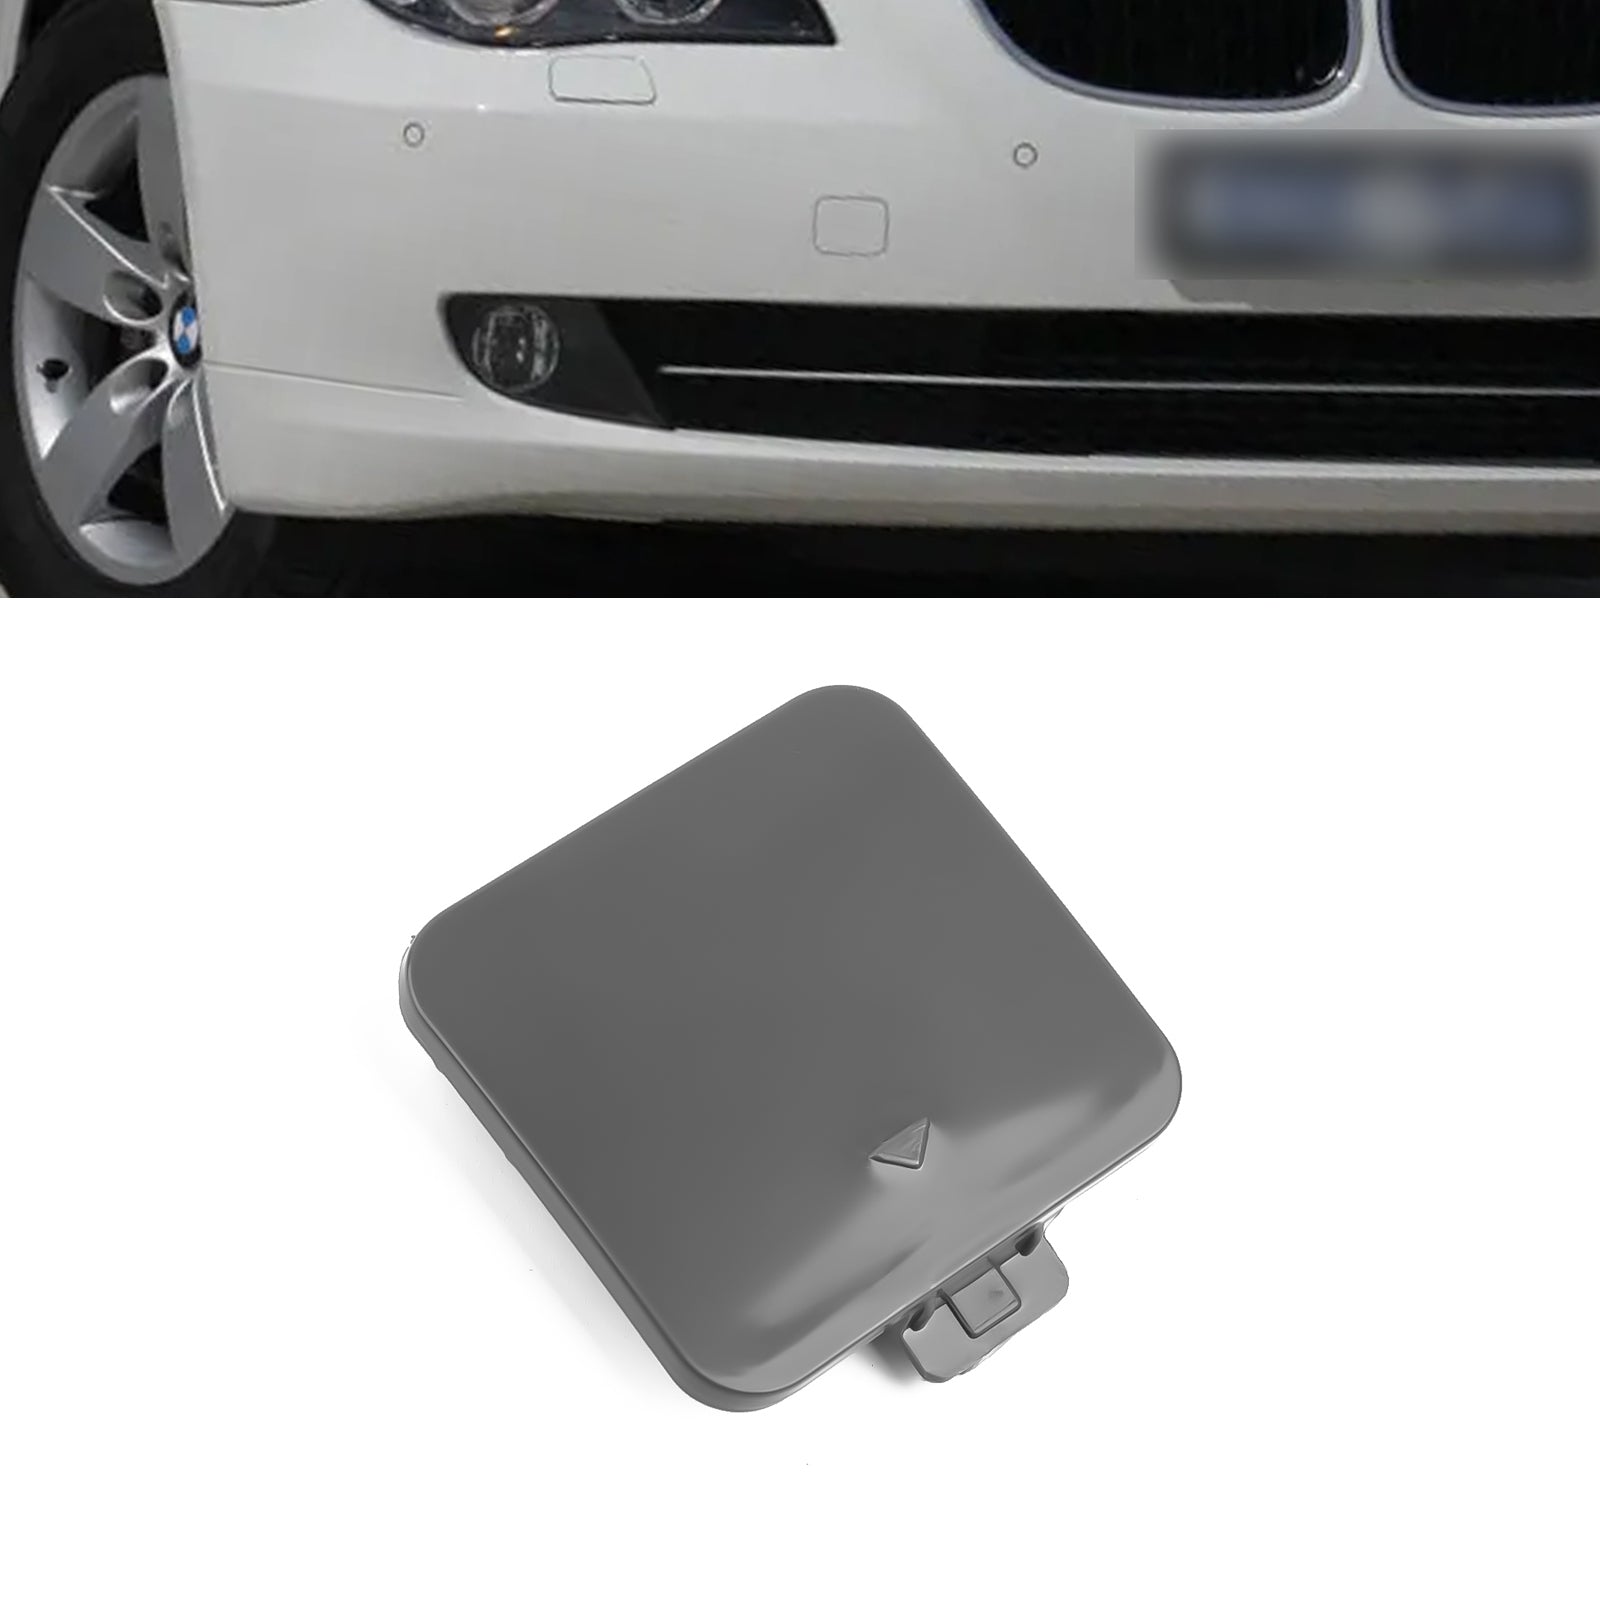 Front Bumper Tow Hook Cap Replacement Cover For BMW 5 Series 525i